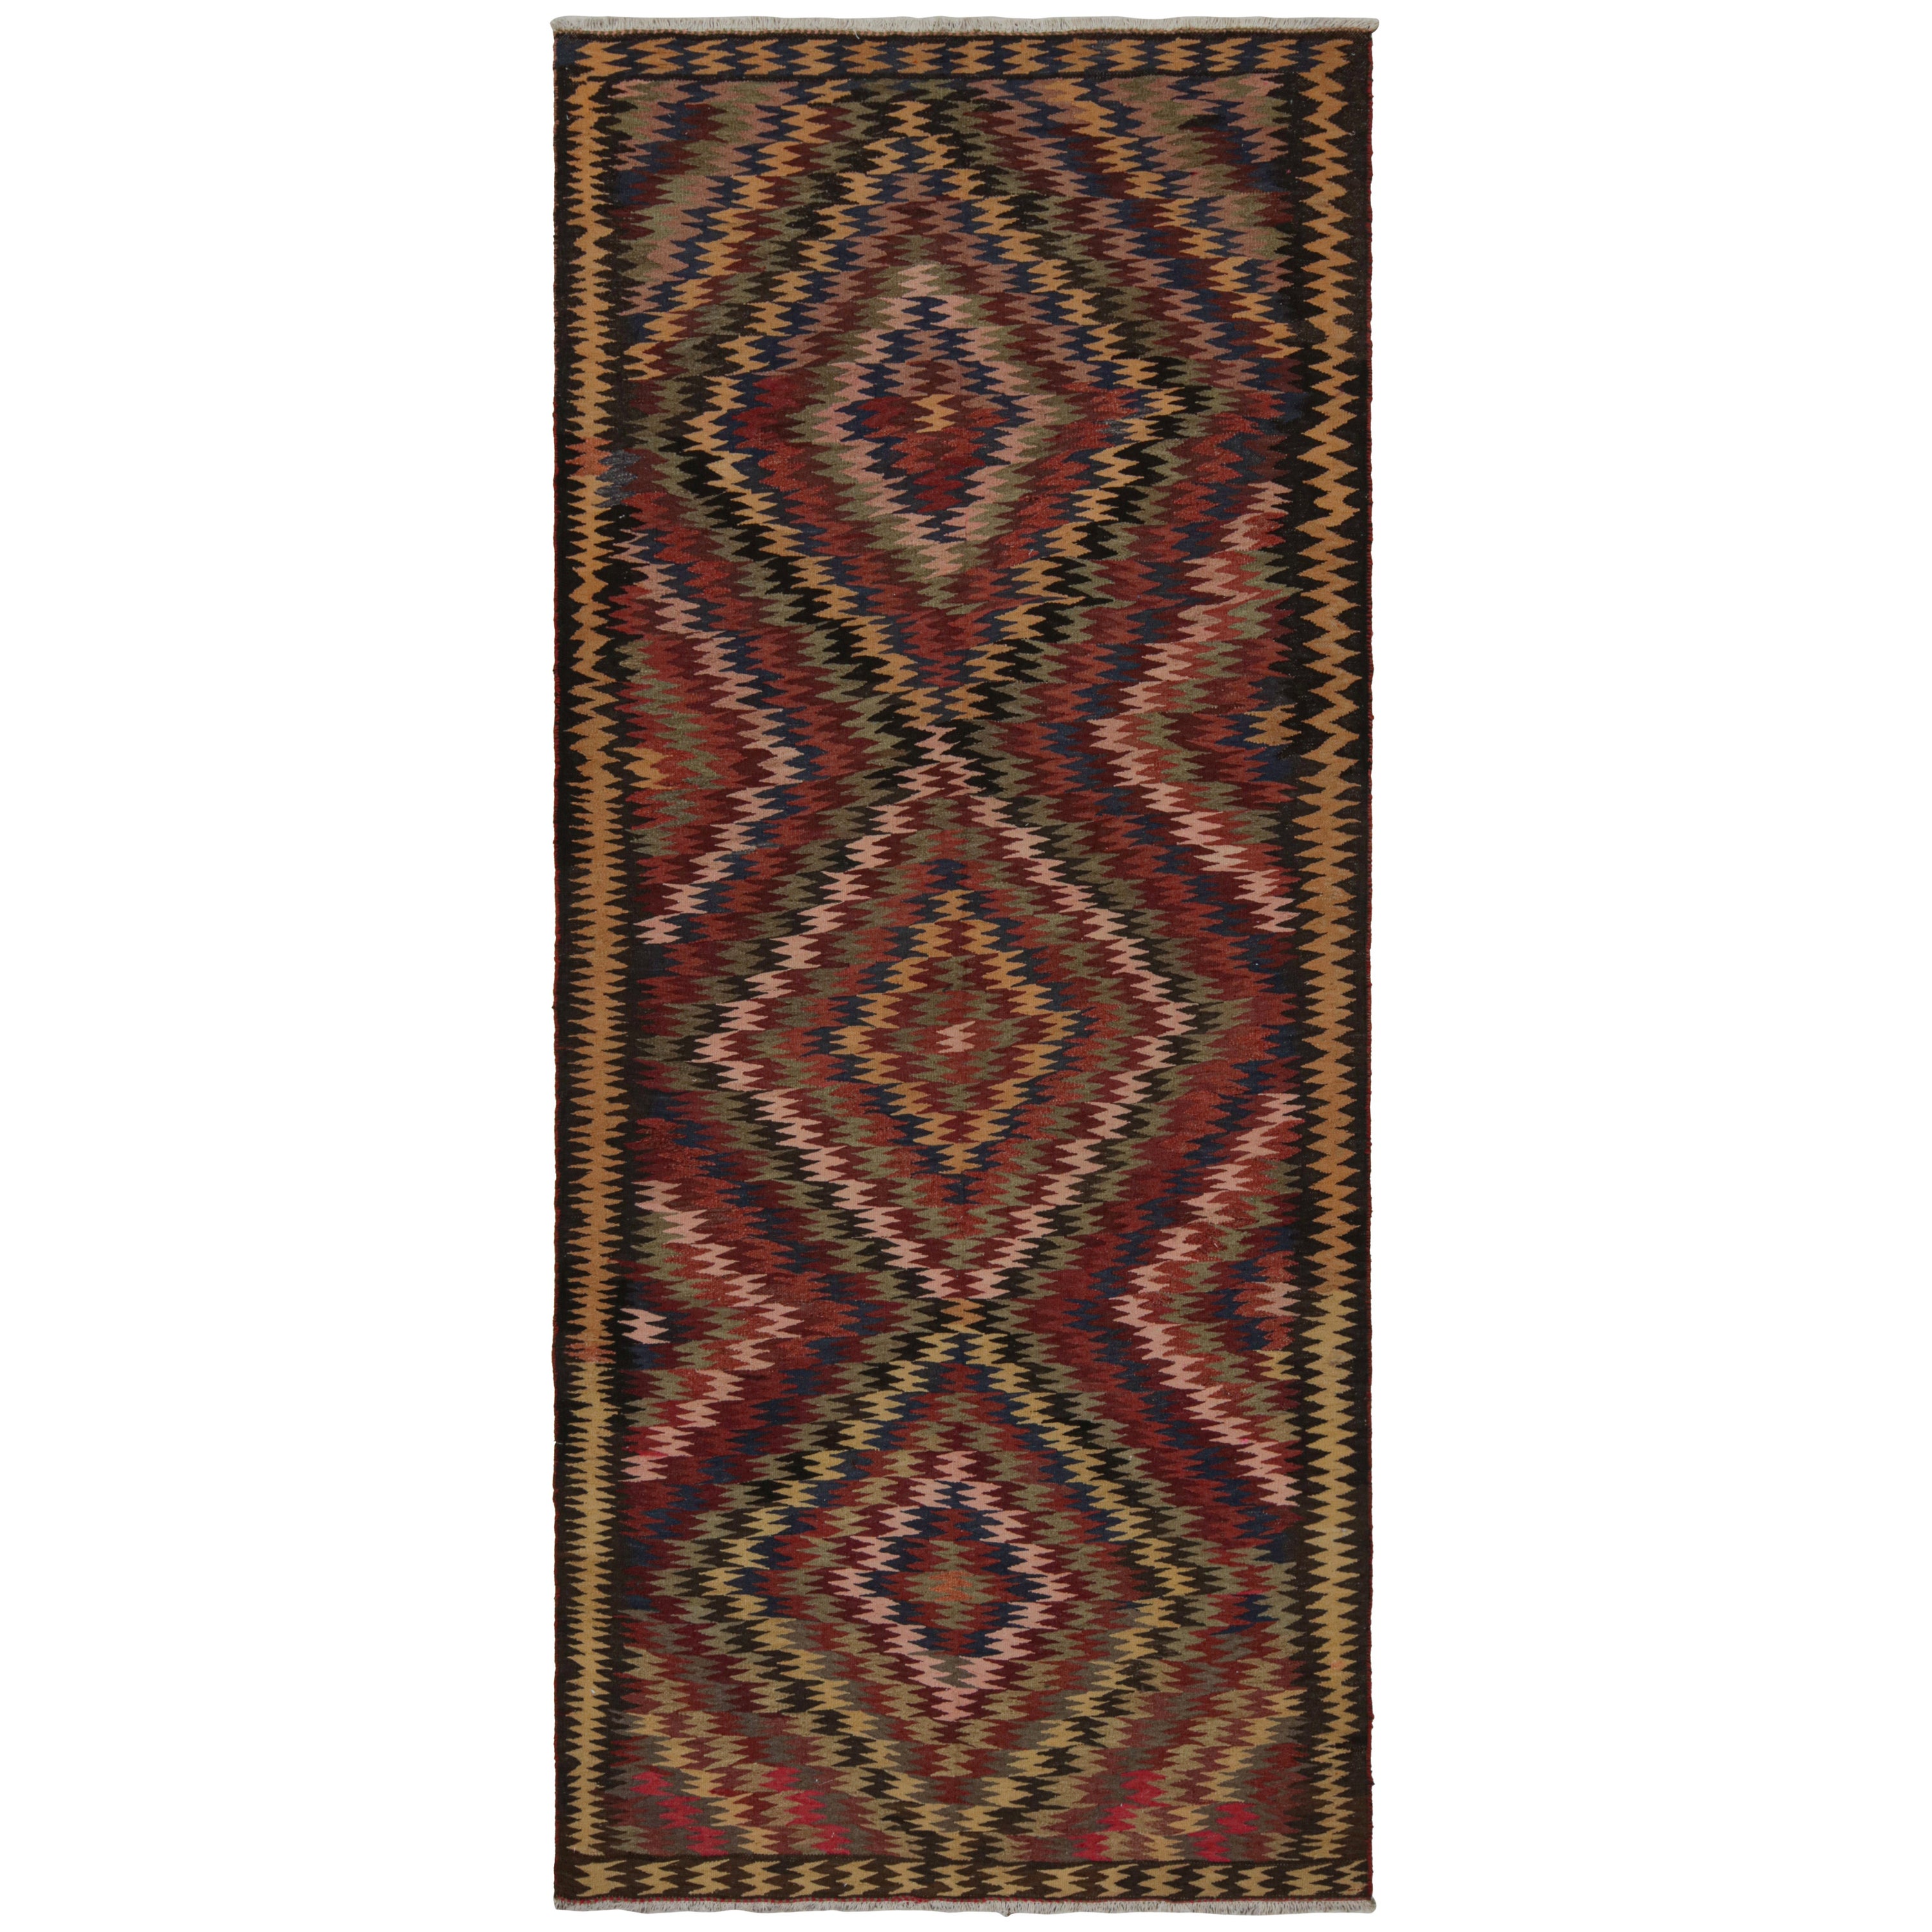 Vintage Persian Kilim in Polychromatic Patterns, from Rug & Kilim For Sale